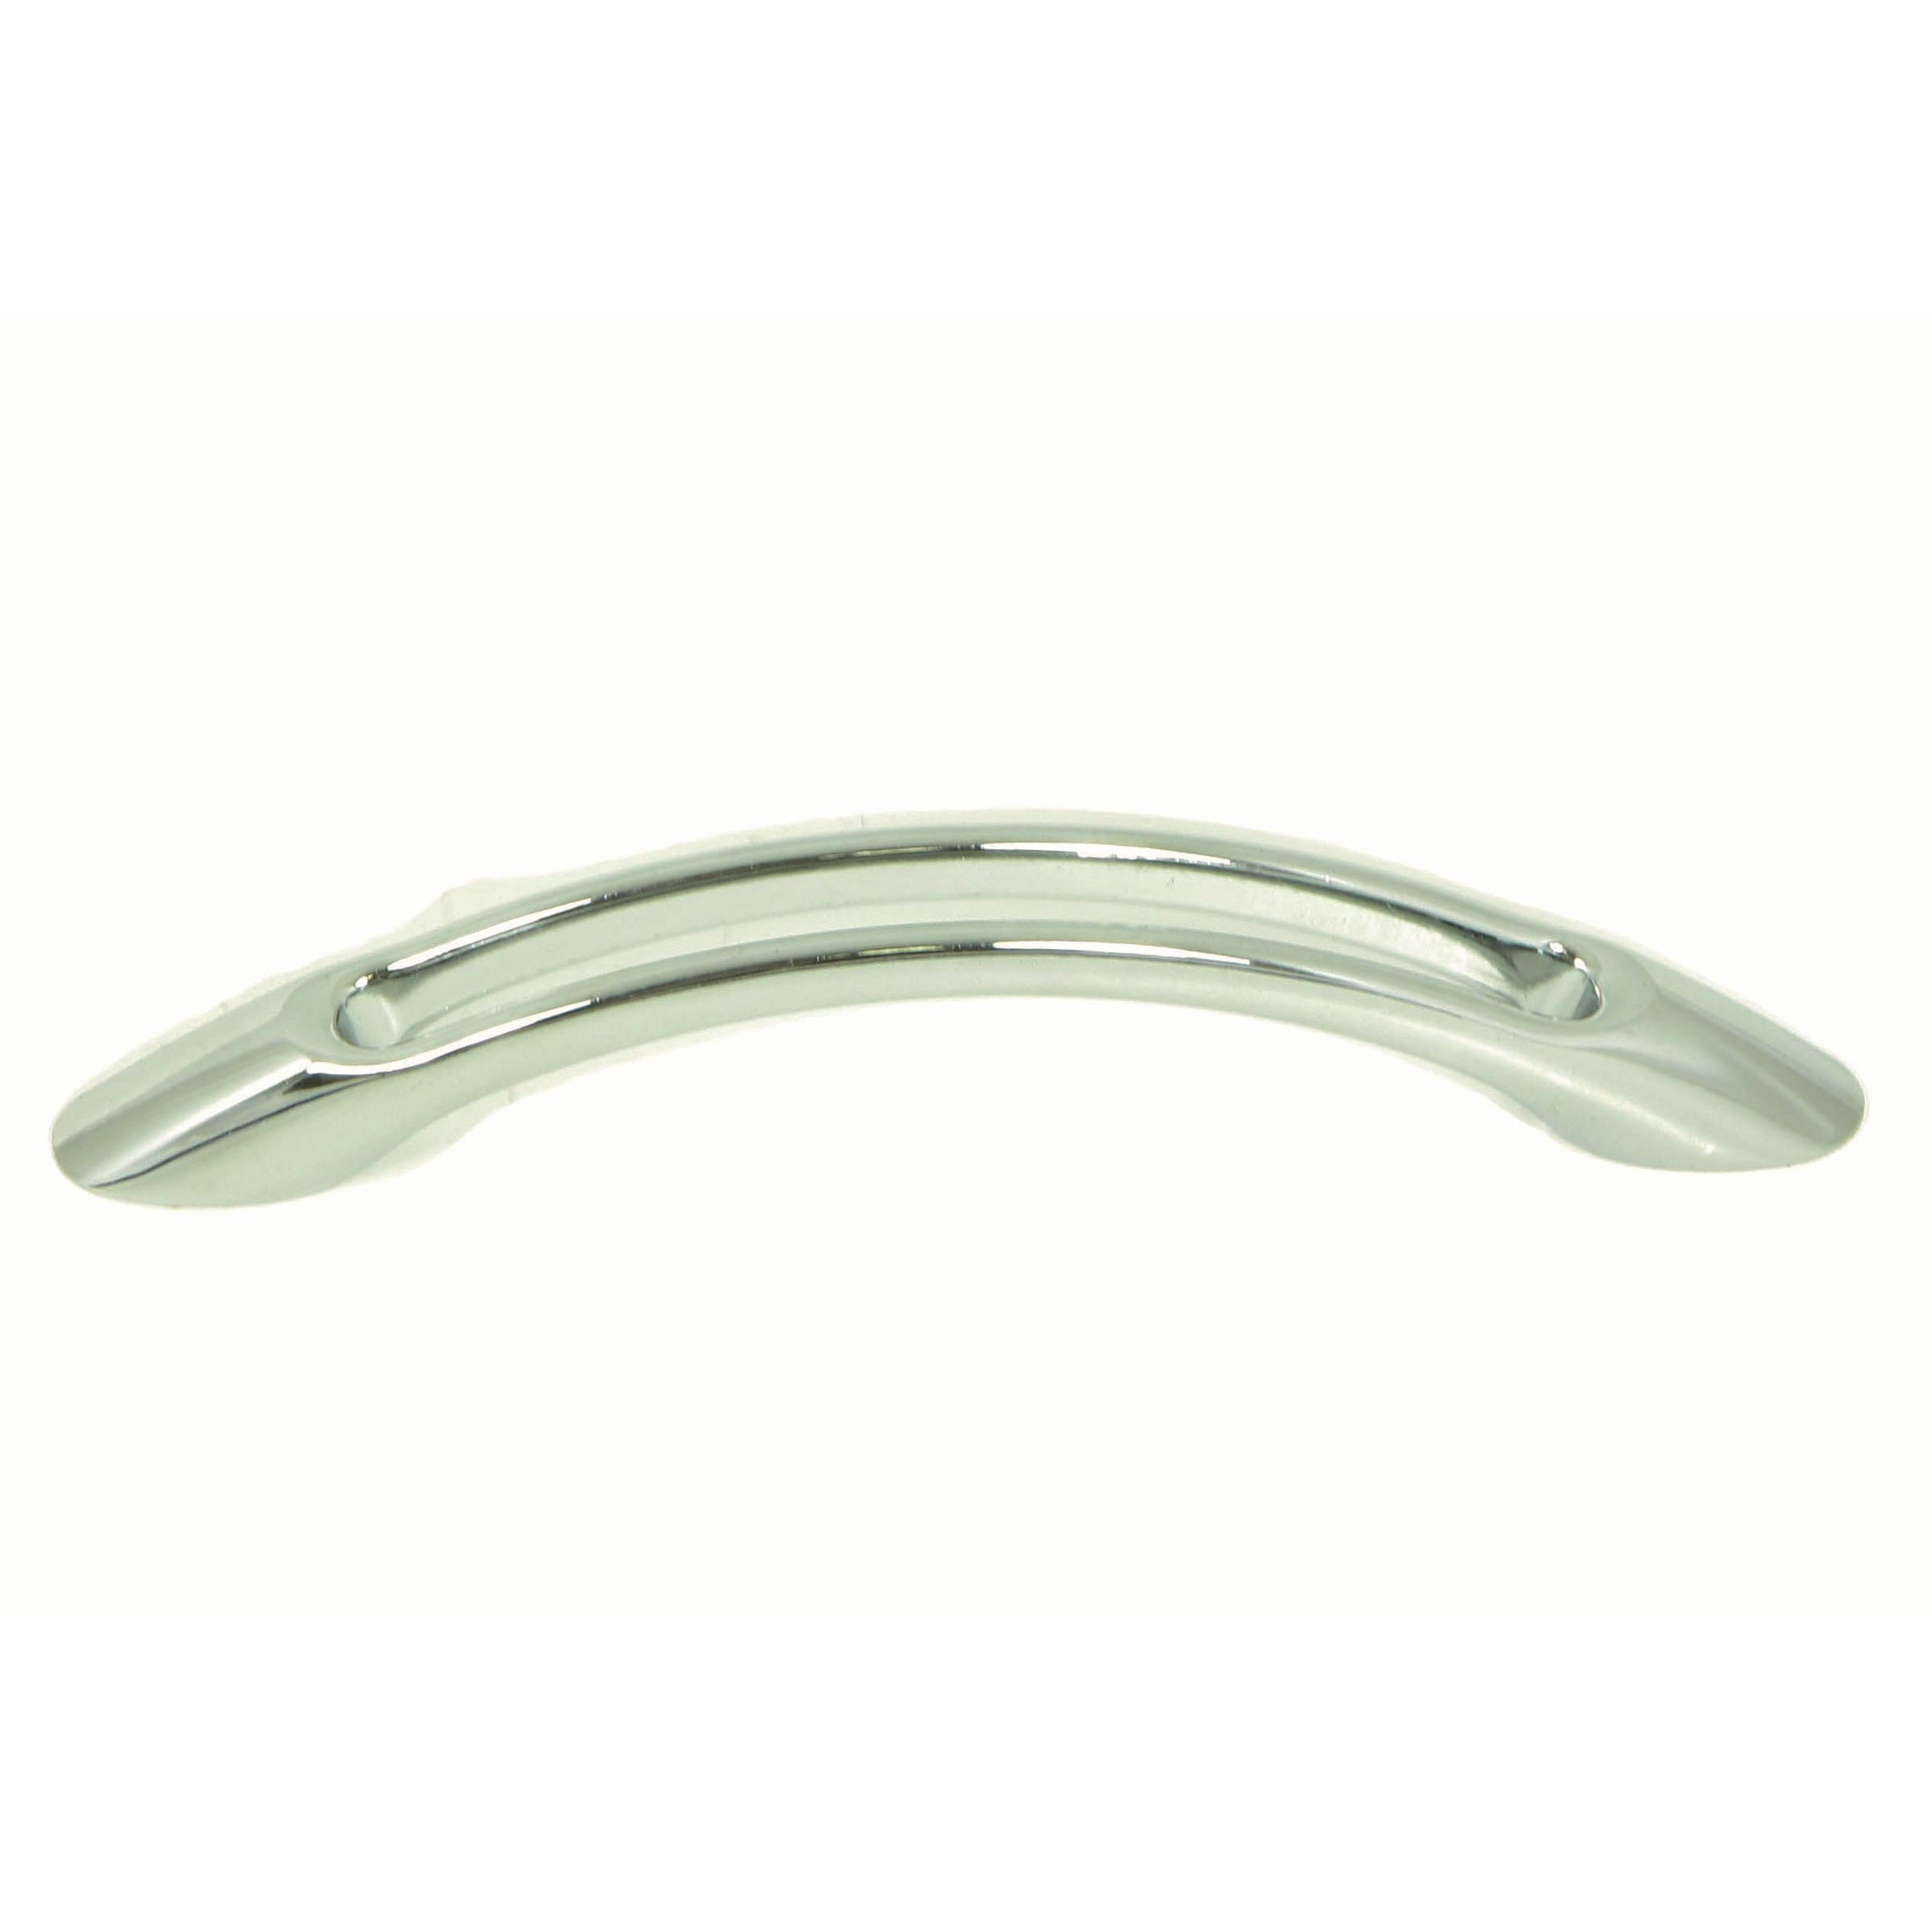 Velocity Cabinet Pull in Polished Chrome 1 pc